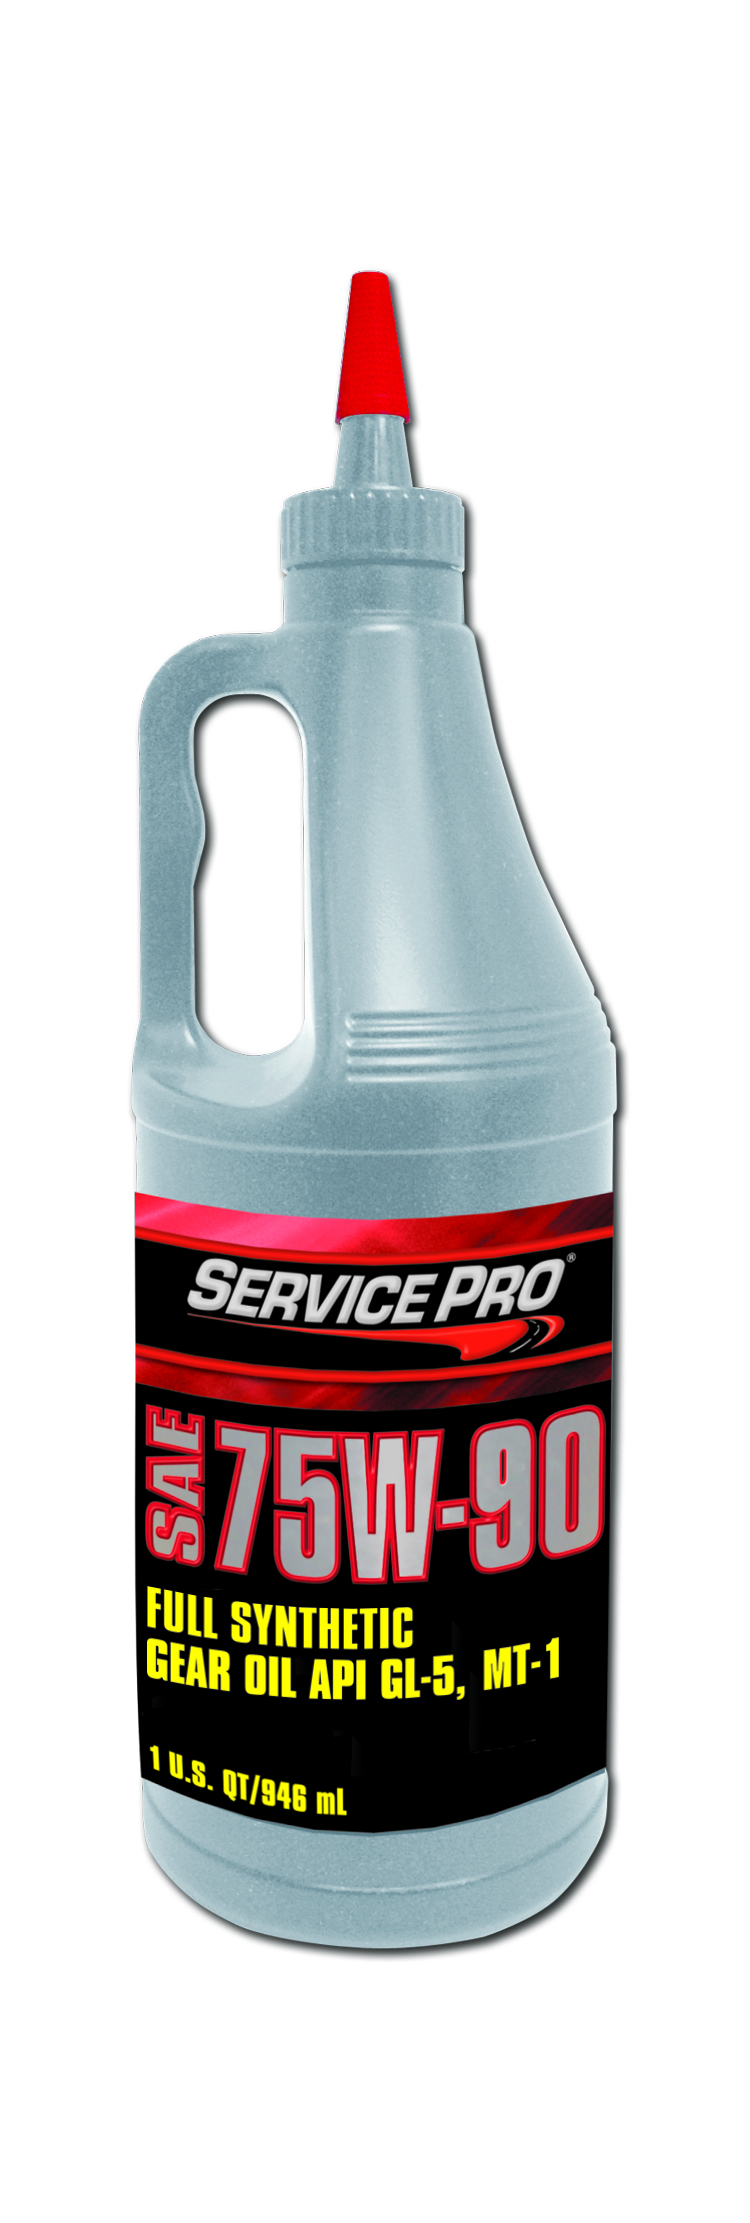 GEAR OIL-SERVICE PRO 75W90  SYNTHETIC NON-EATON APPROVED 